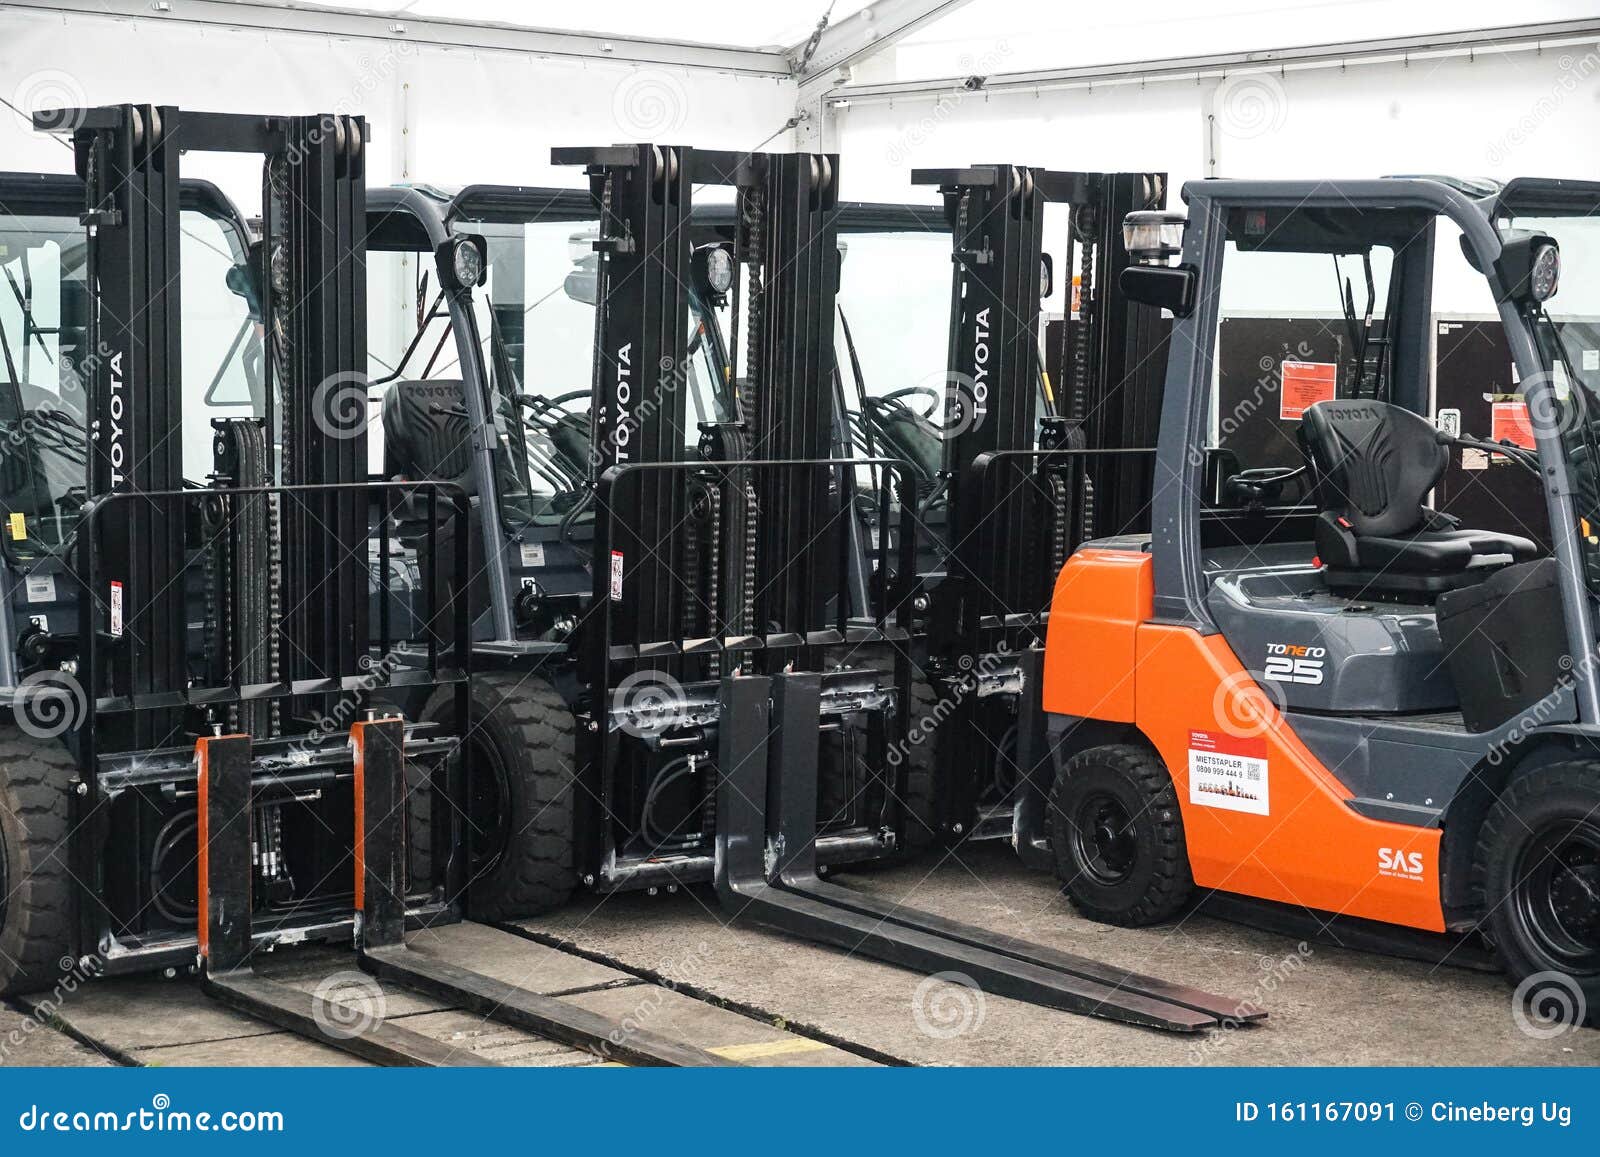 Used toyota forklift prices